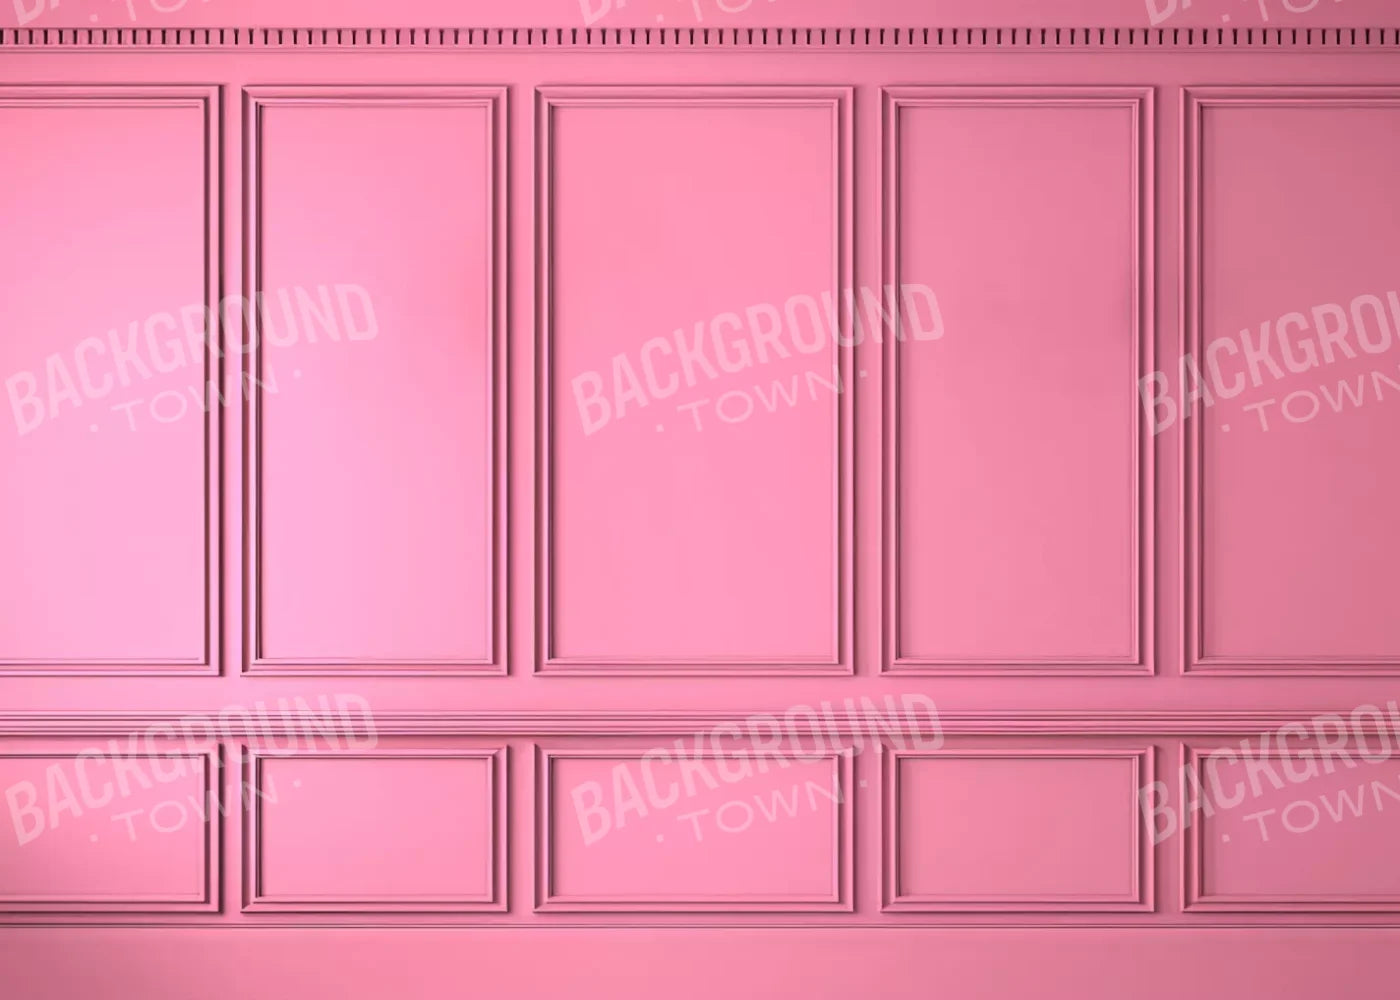 Carrie Pink 3 7’X5’ Ultracloth (84 X 60 Inch) Backdrop